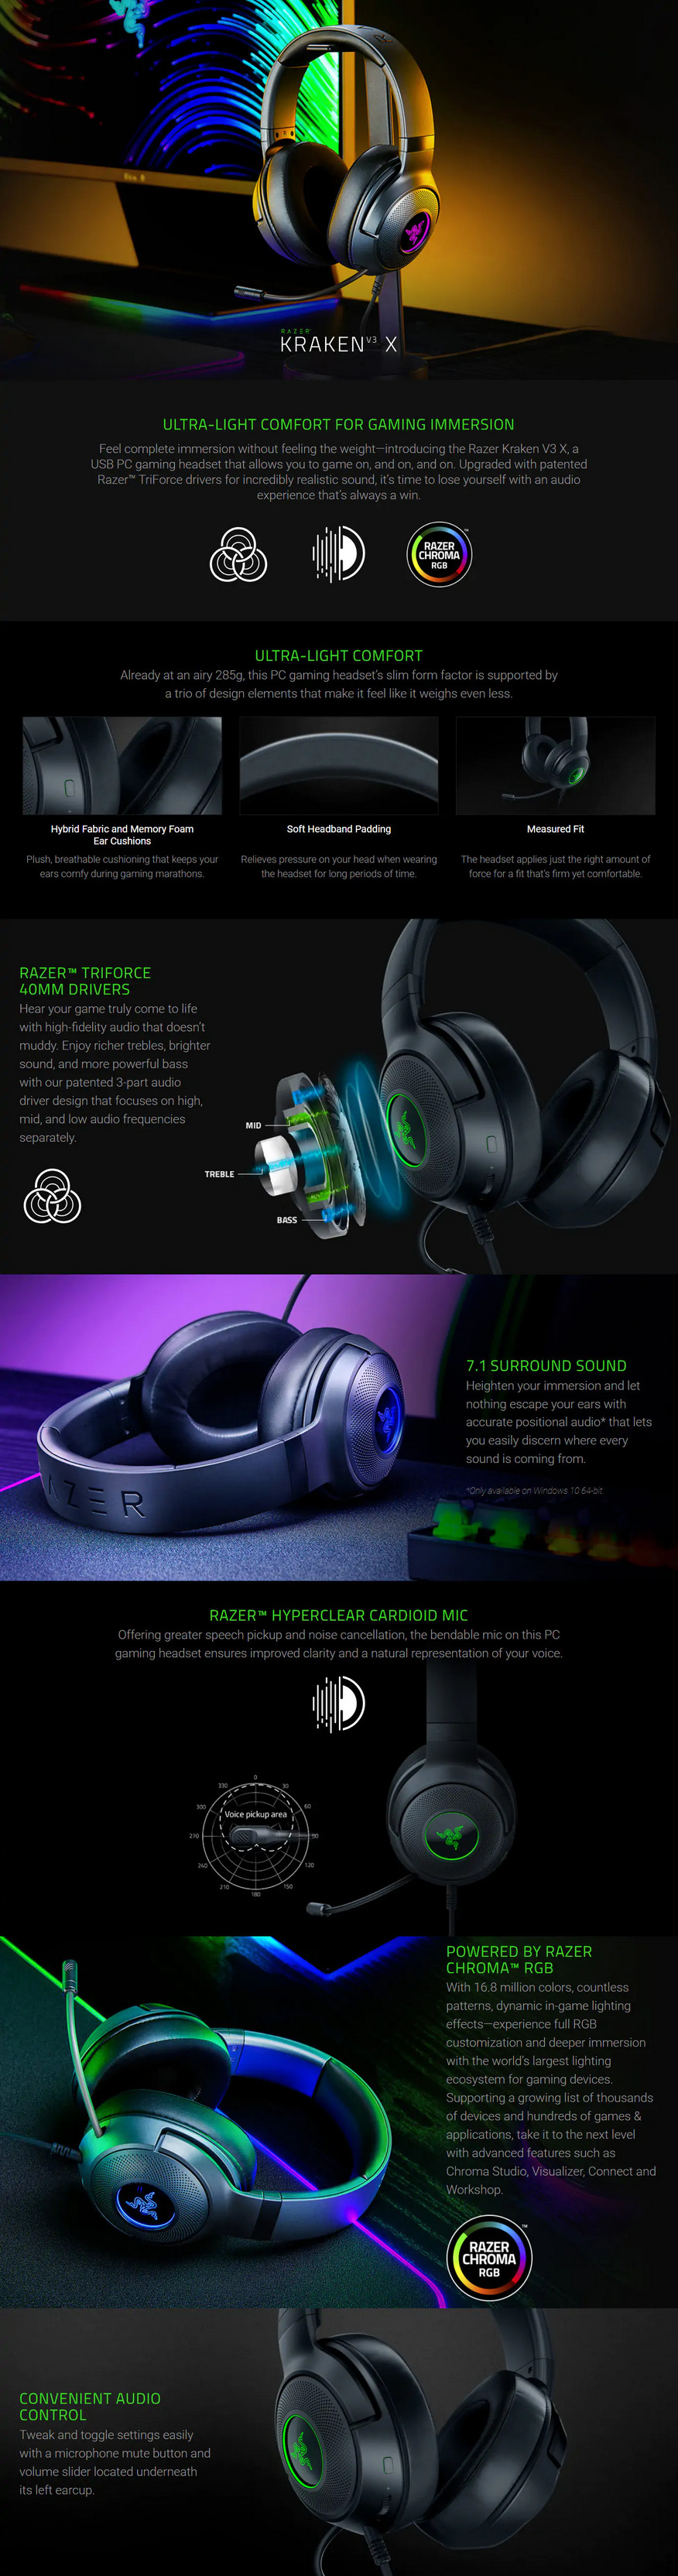 A large marketing image providing additional information about the product Razer Kraken V3 X - Wired USB Gaming Headset - Additional alt info not provided